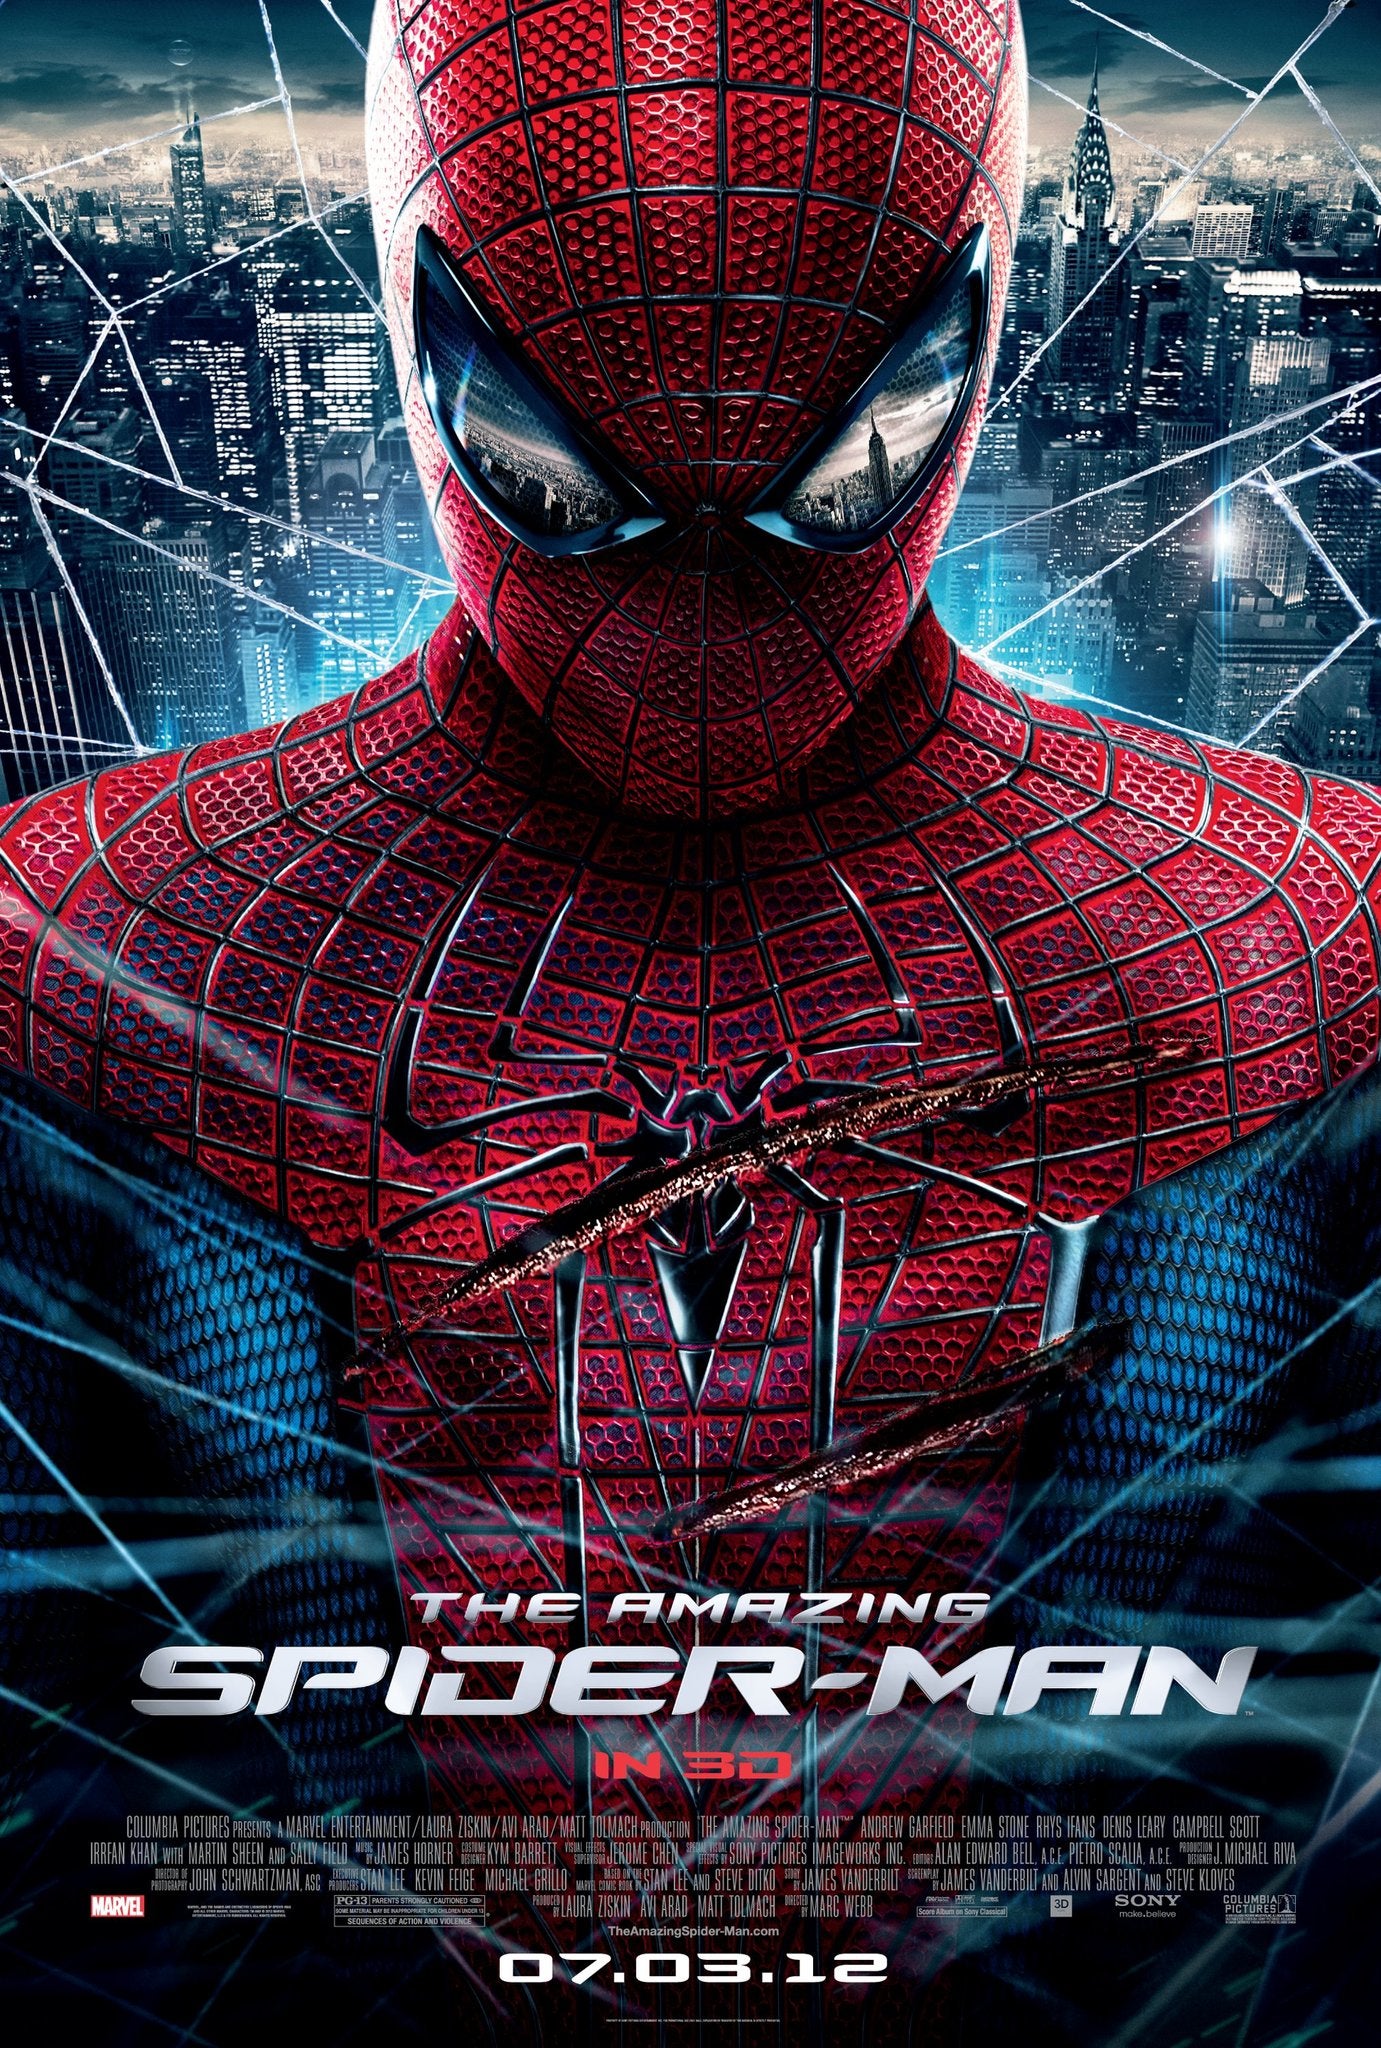 Poster for The Amazing Spider-Man, showing Spider-man in red and blue suit, looking downwards